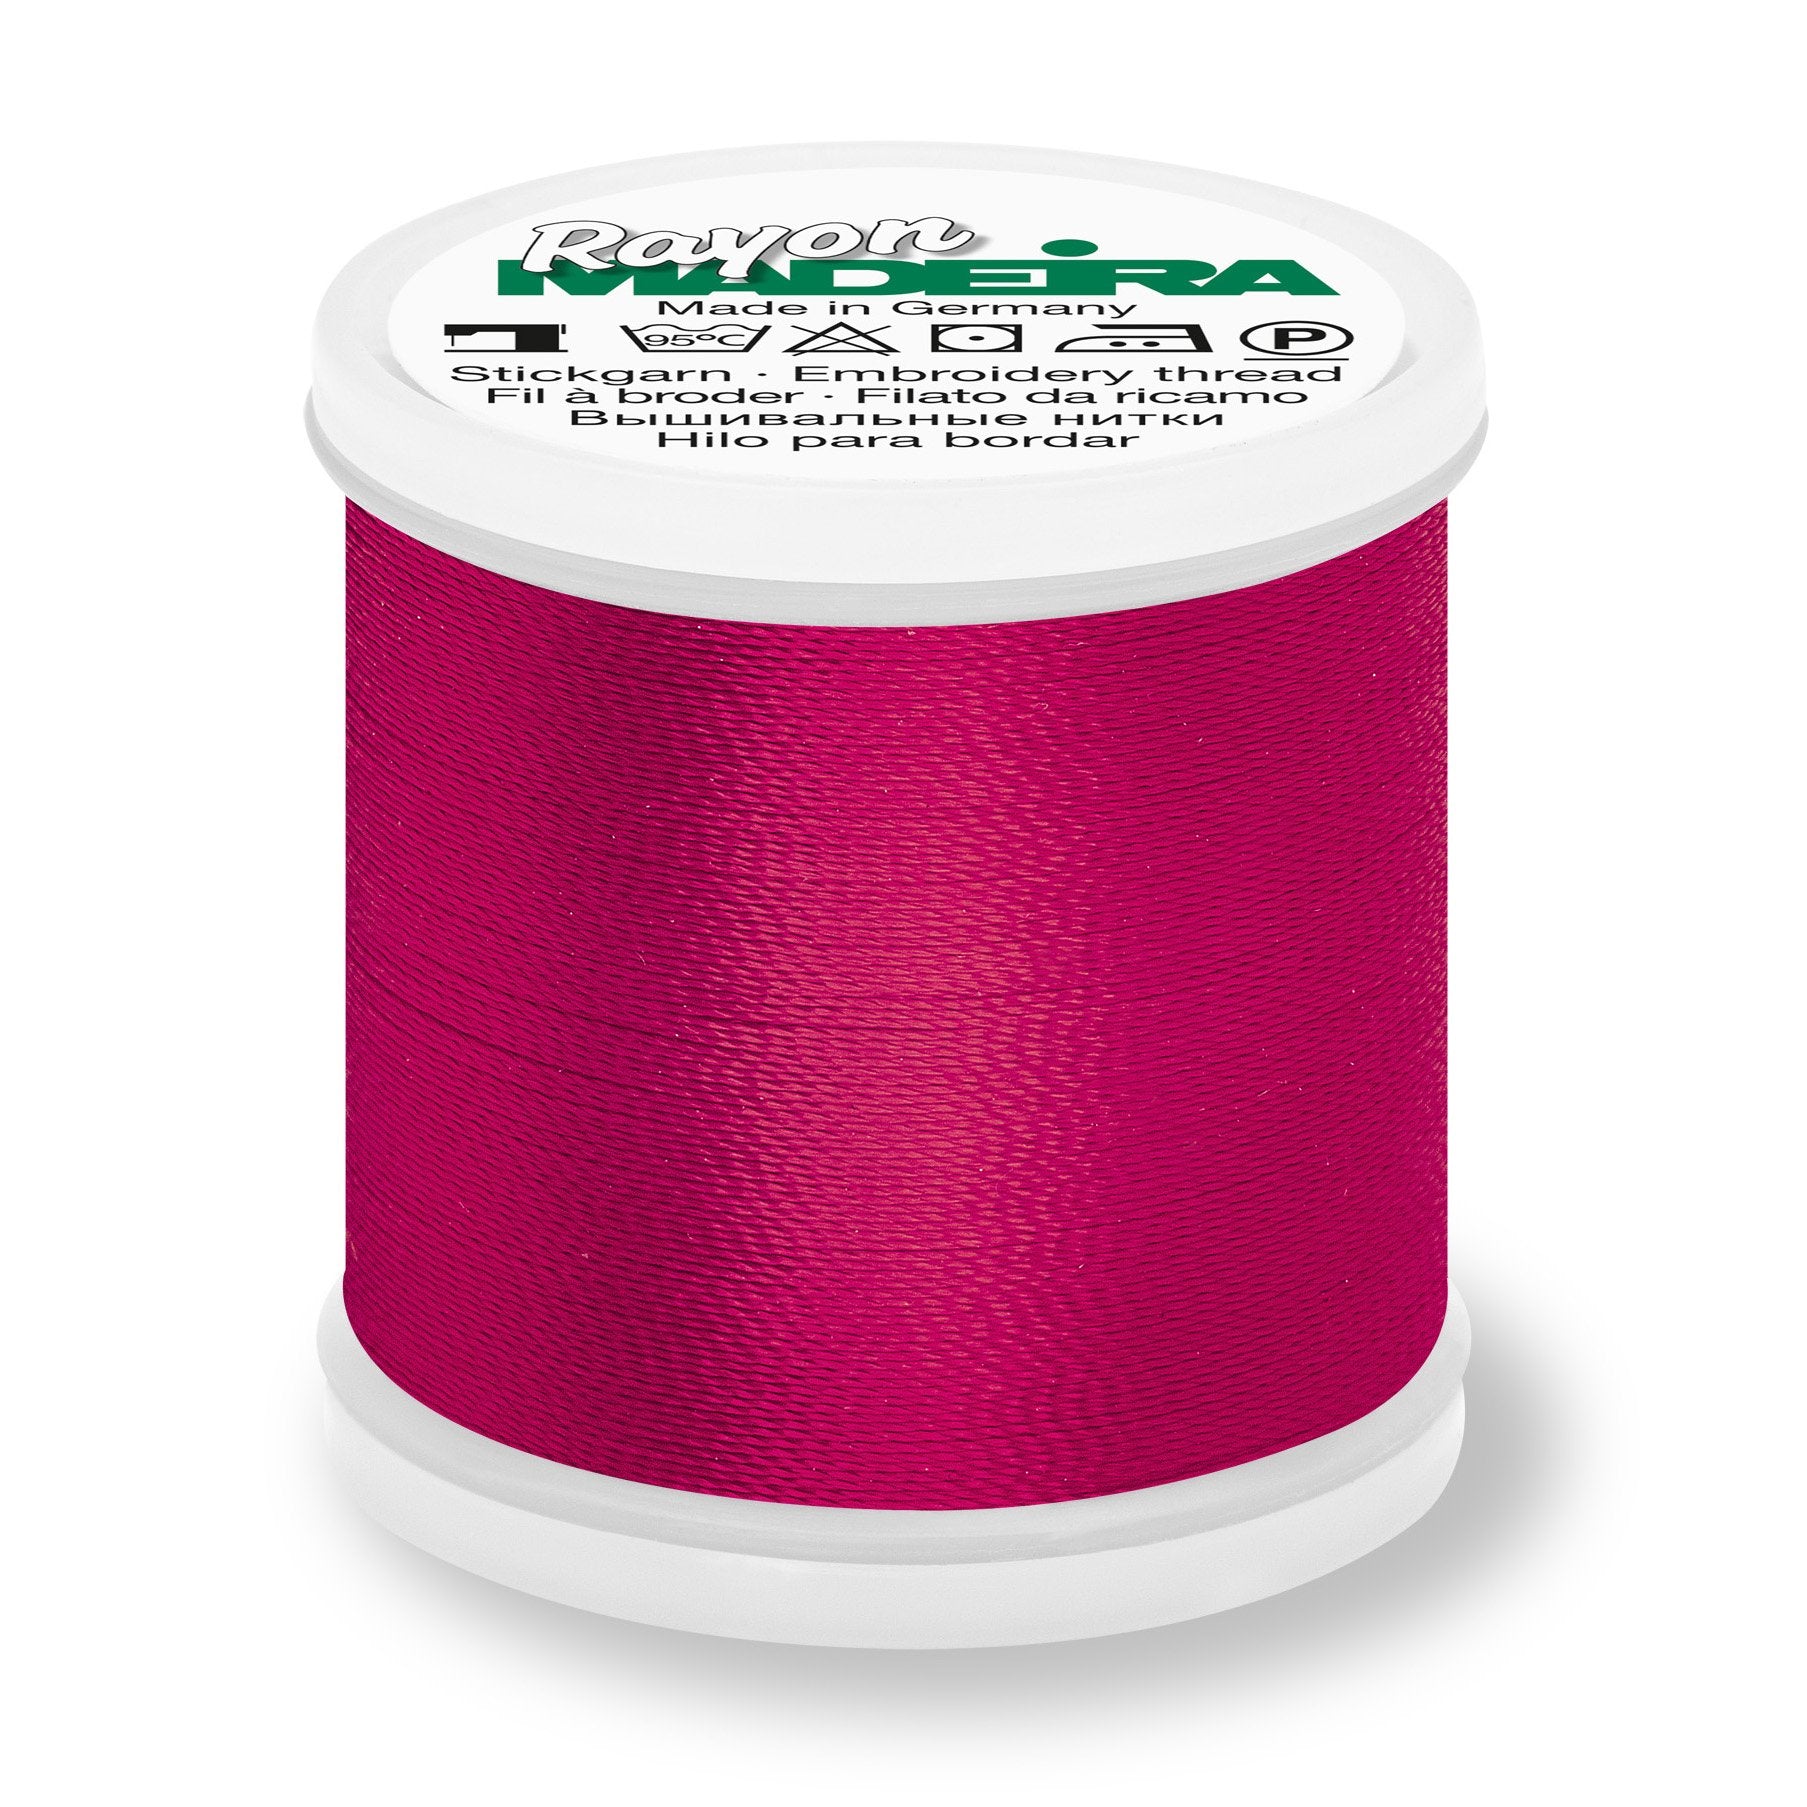 Madeira Rayon 40 Embroidery Thread 200m #1186 Cerise from Jaycotts Sewing Supplies